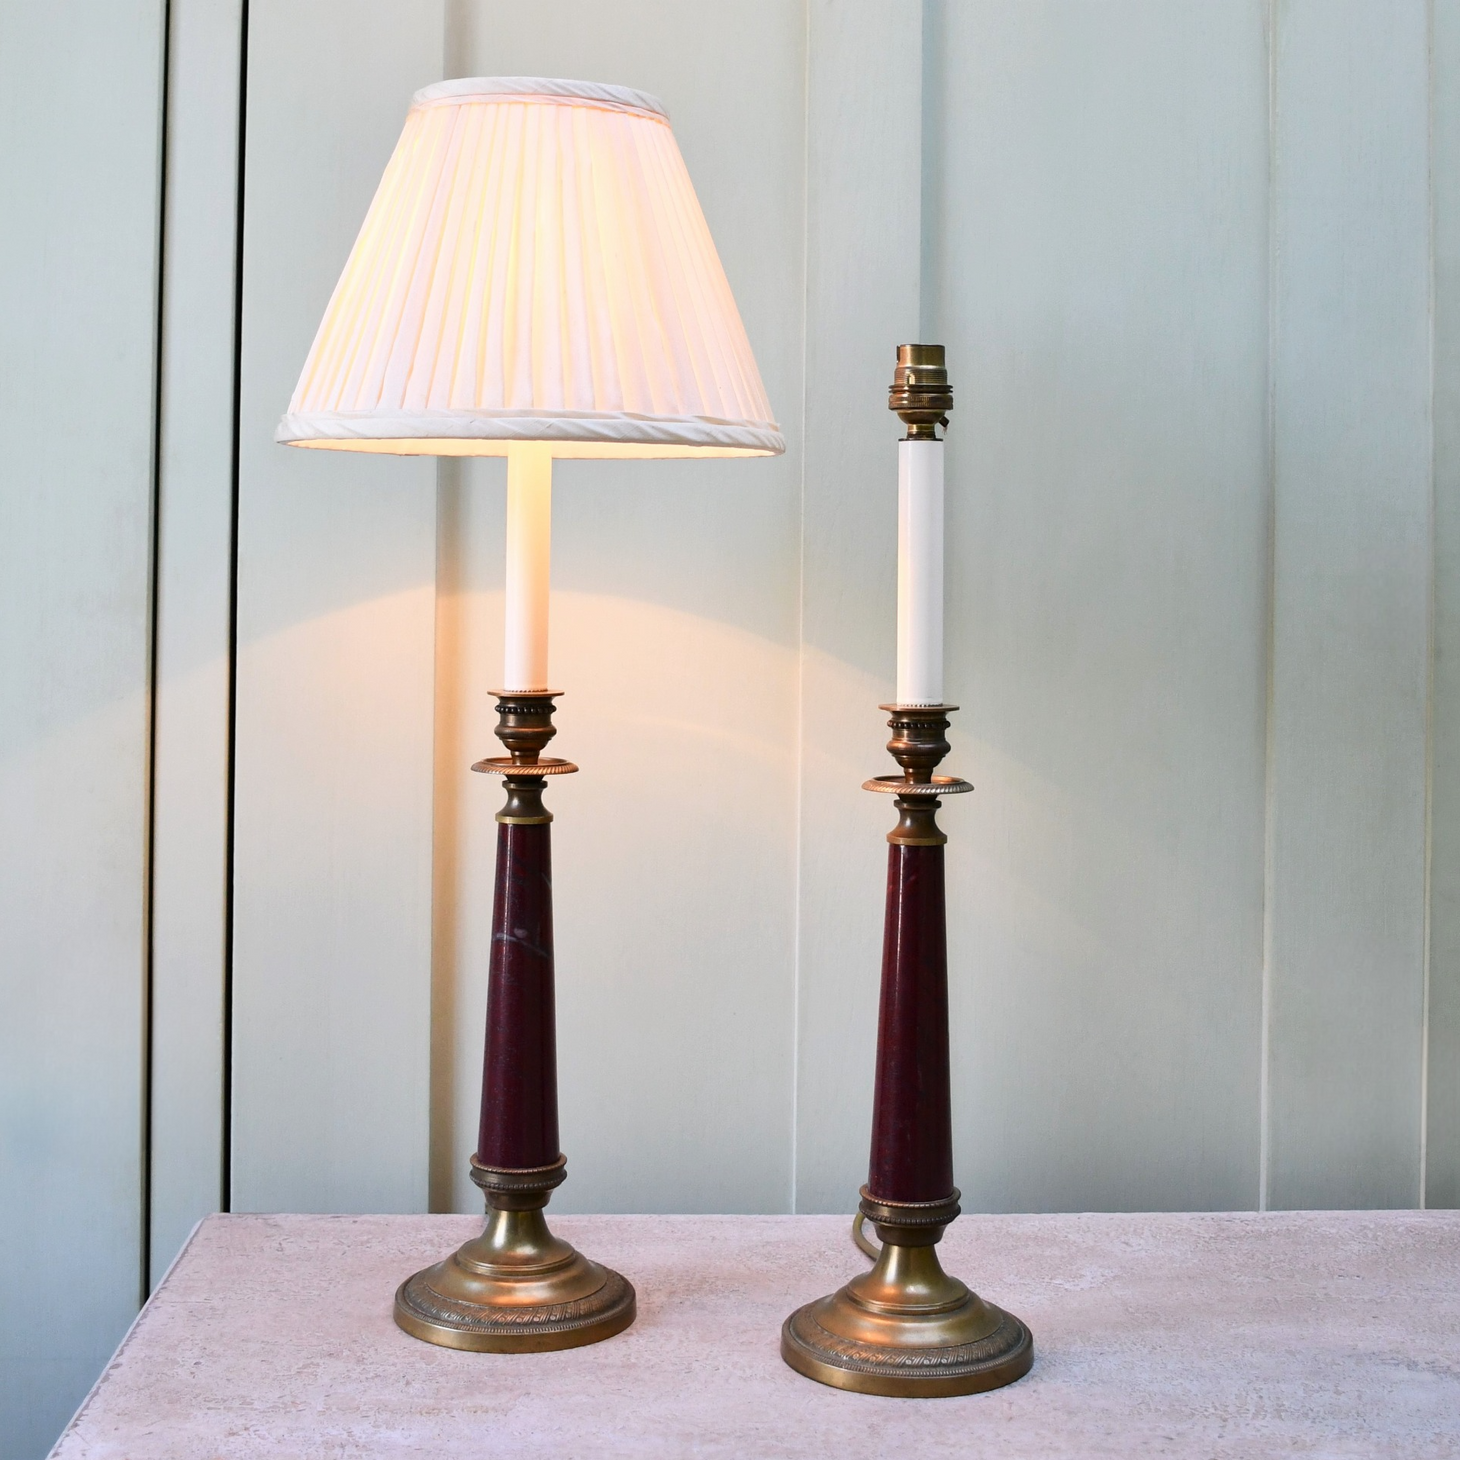 A Pair of Vaughan Designs - Candlestick Lamps